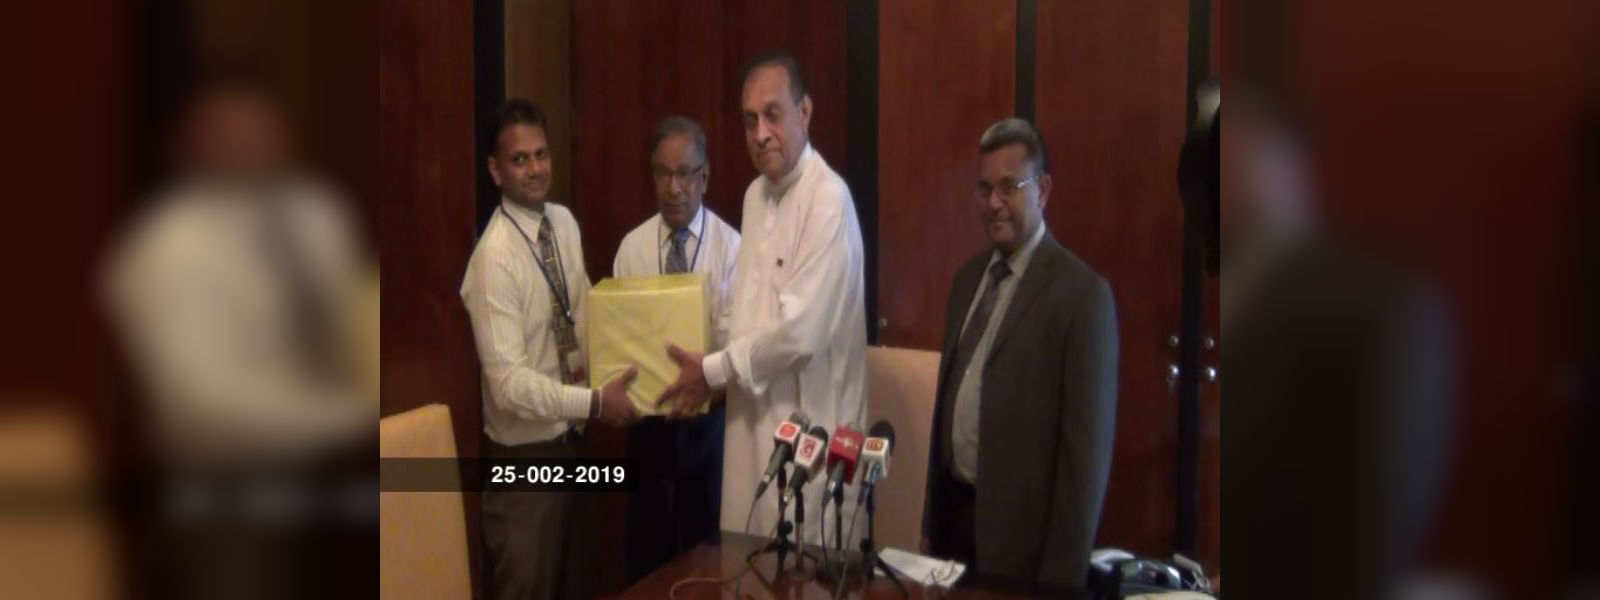 Martin Wickramasinghe books given to parliament  